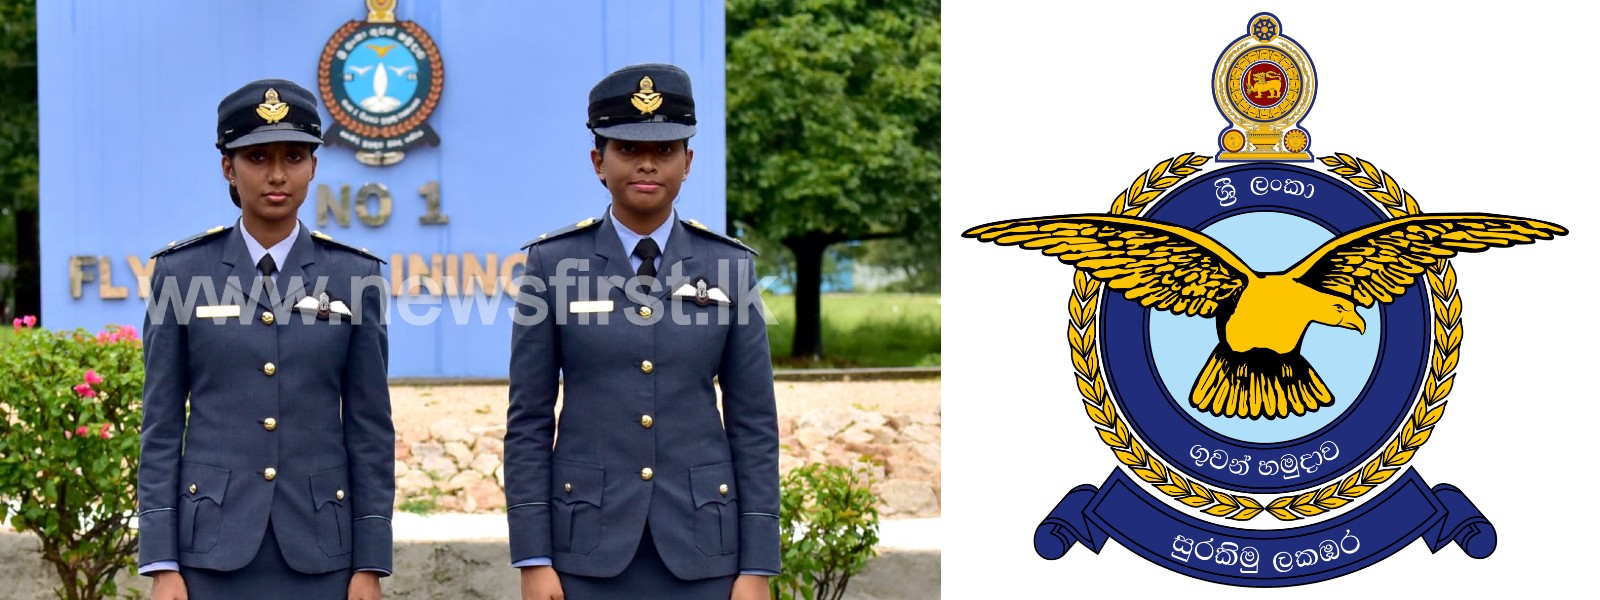 02 Female Officers commissioned as Pilots for the 01st time in SLAF history